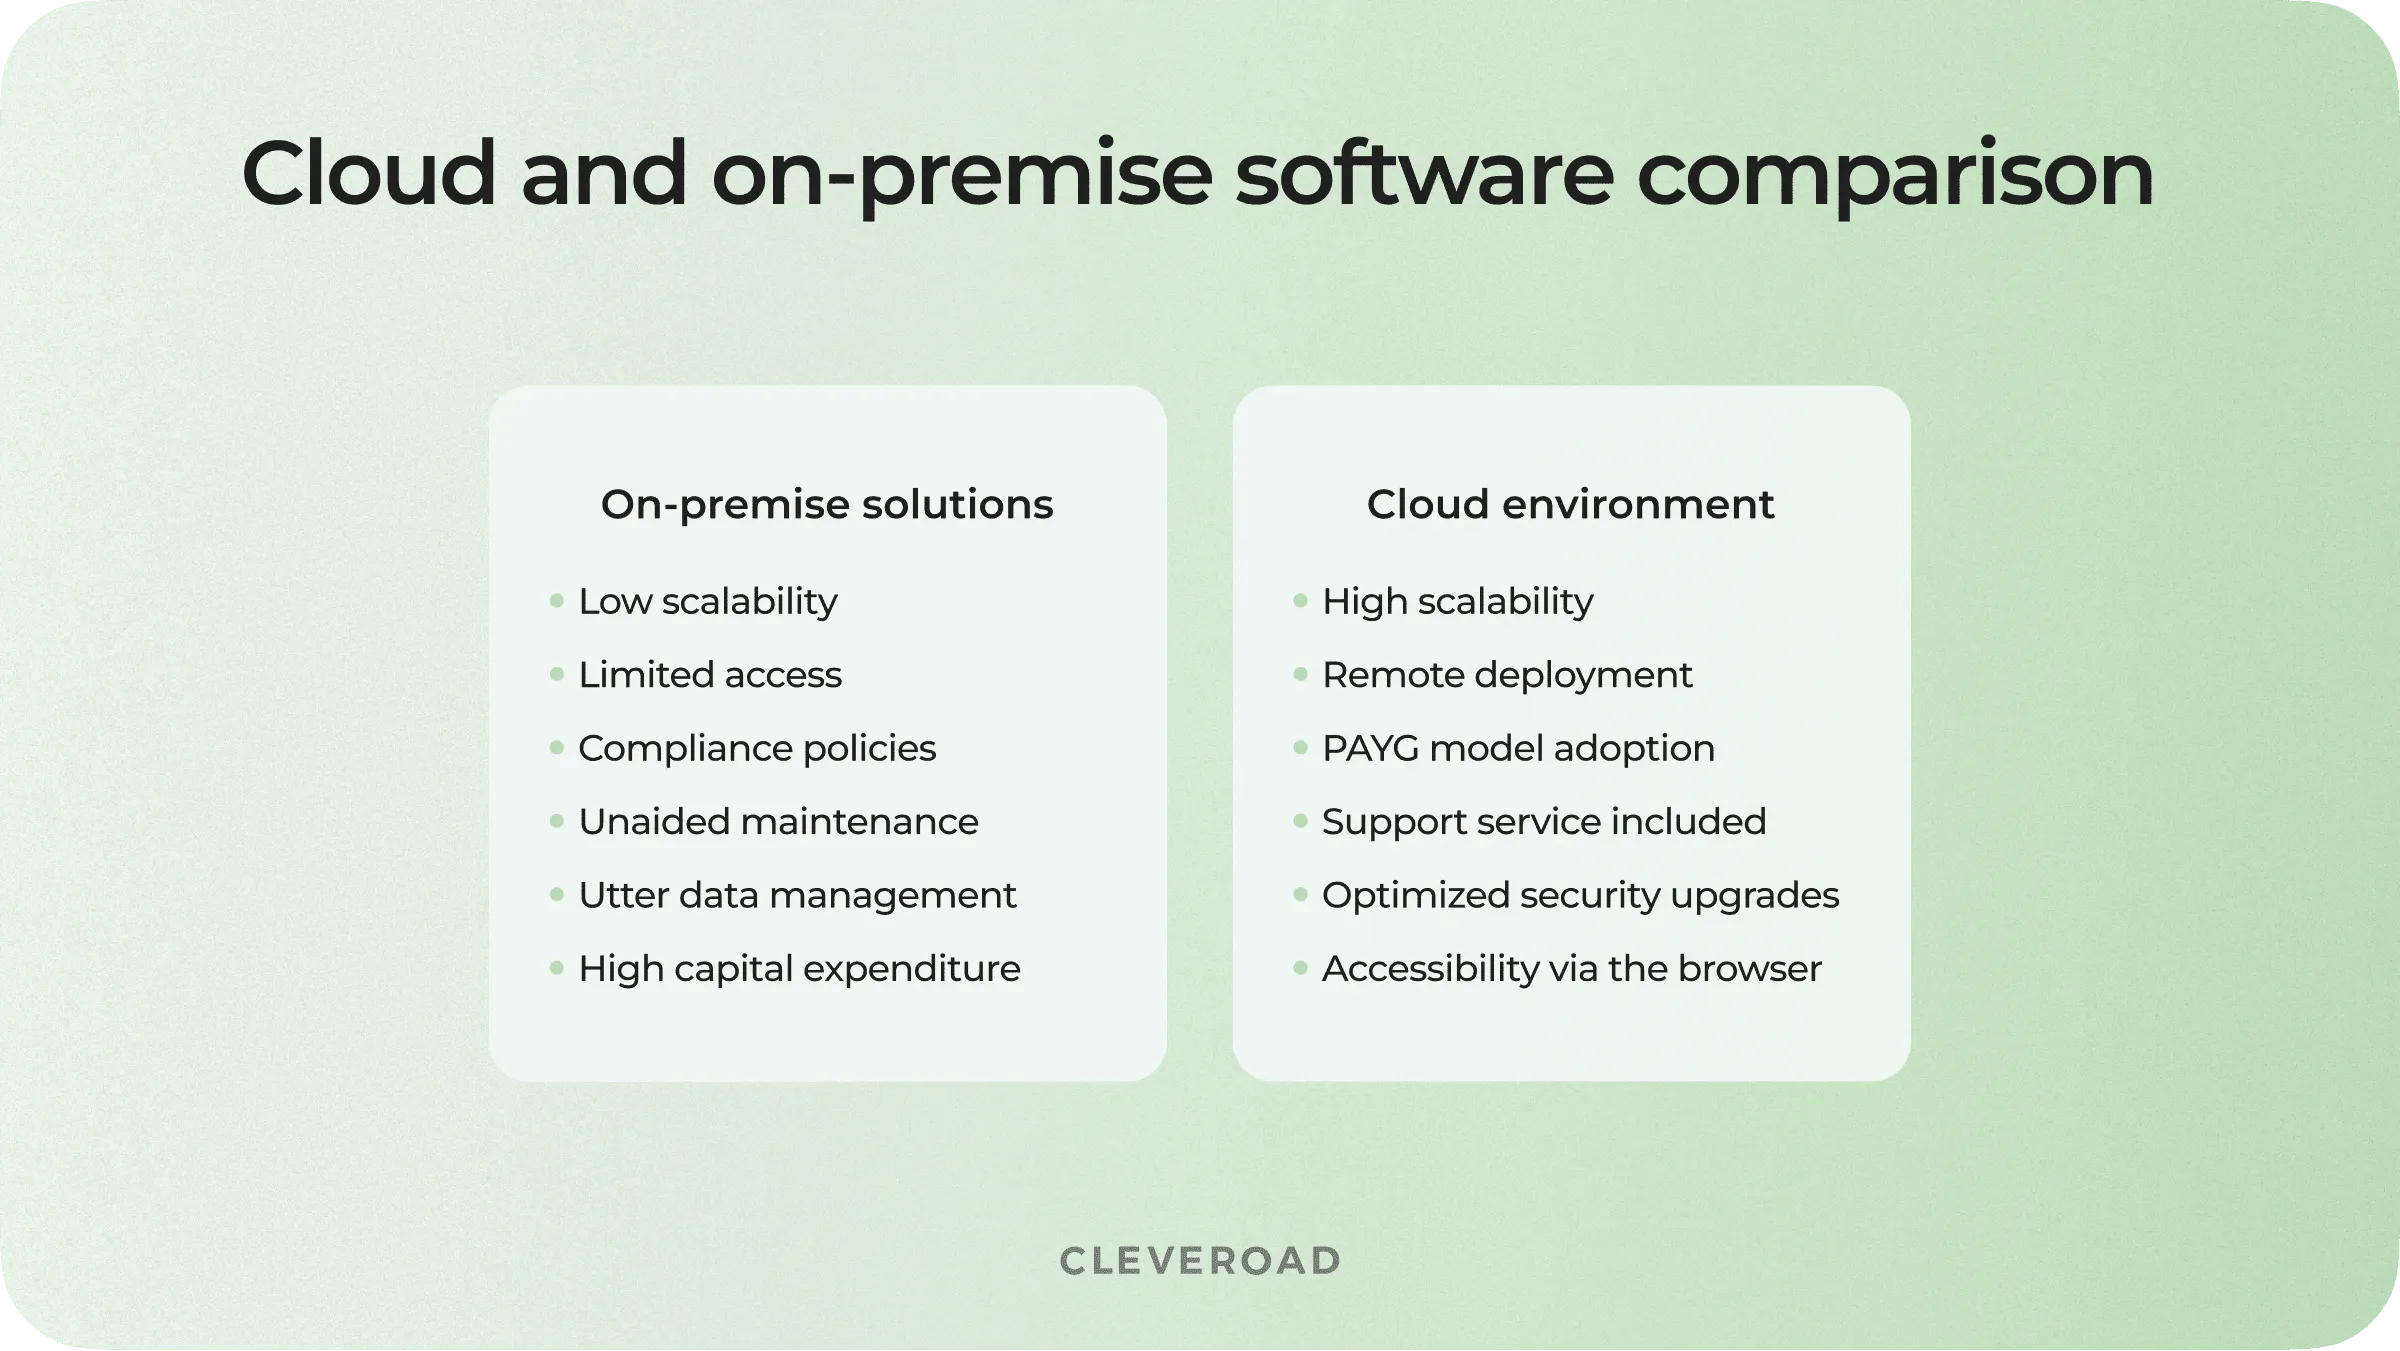 Cloud and on-premise software comparison